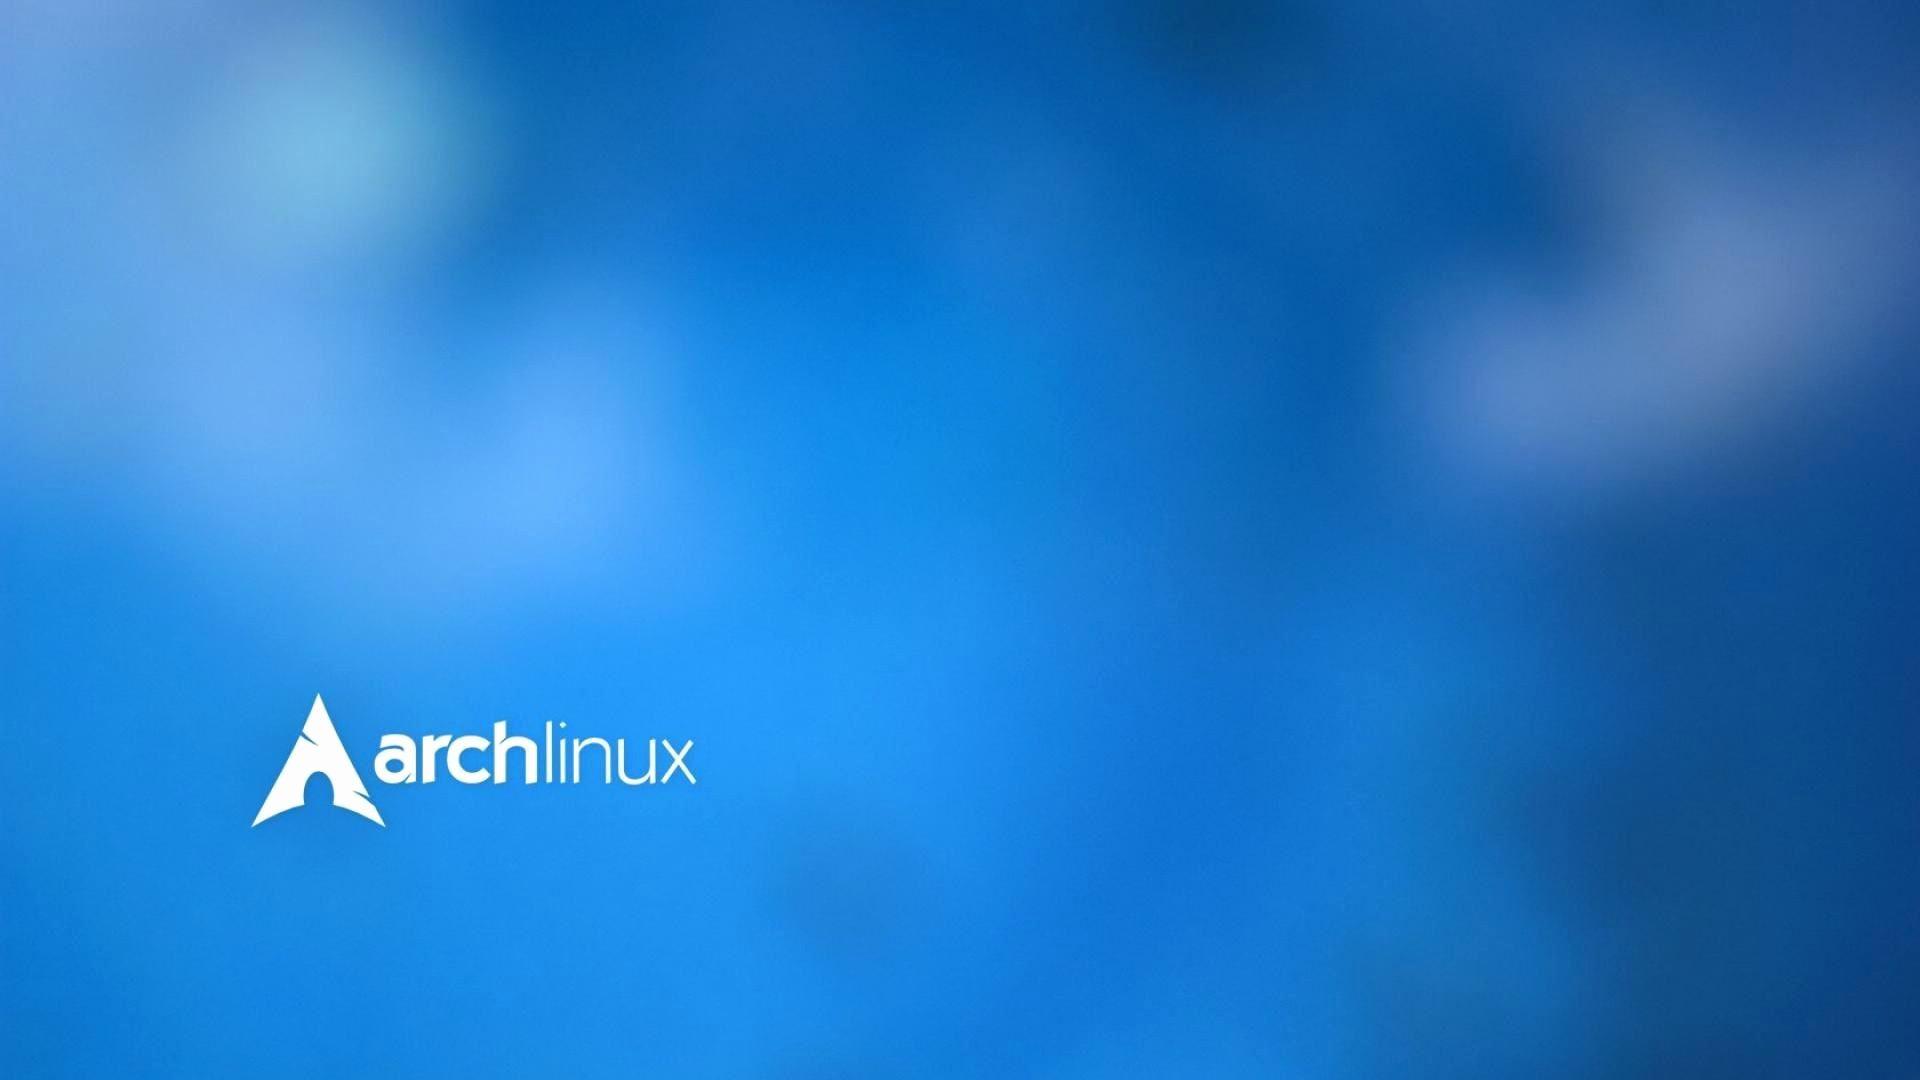 Linux Wallpaper Awesome Arch Linux Background Full HD Sharovarka